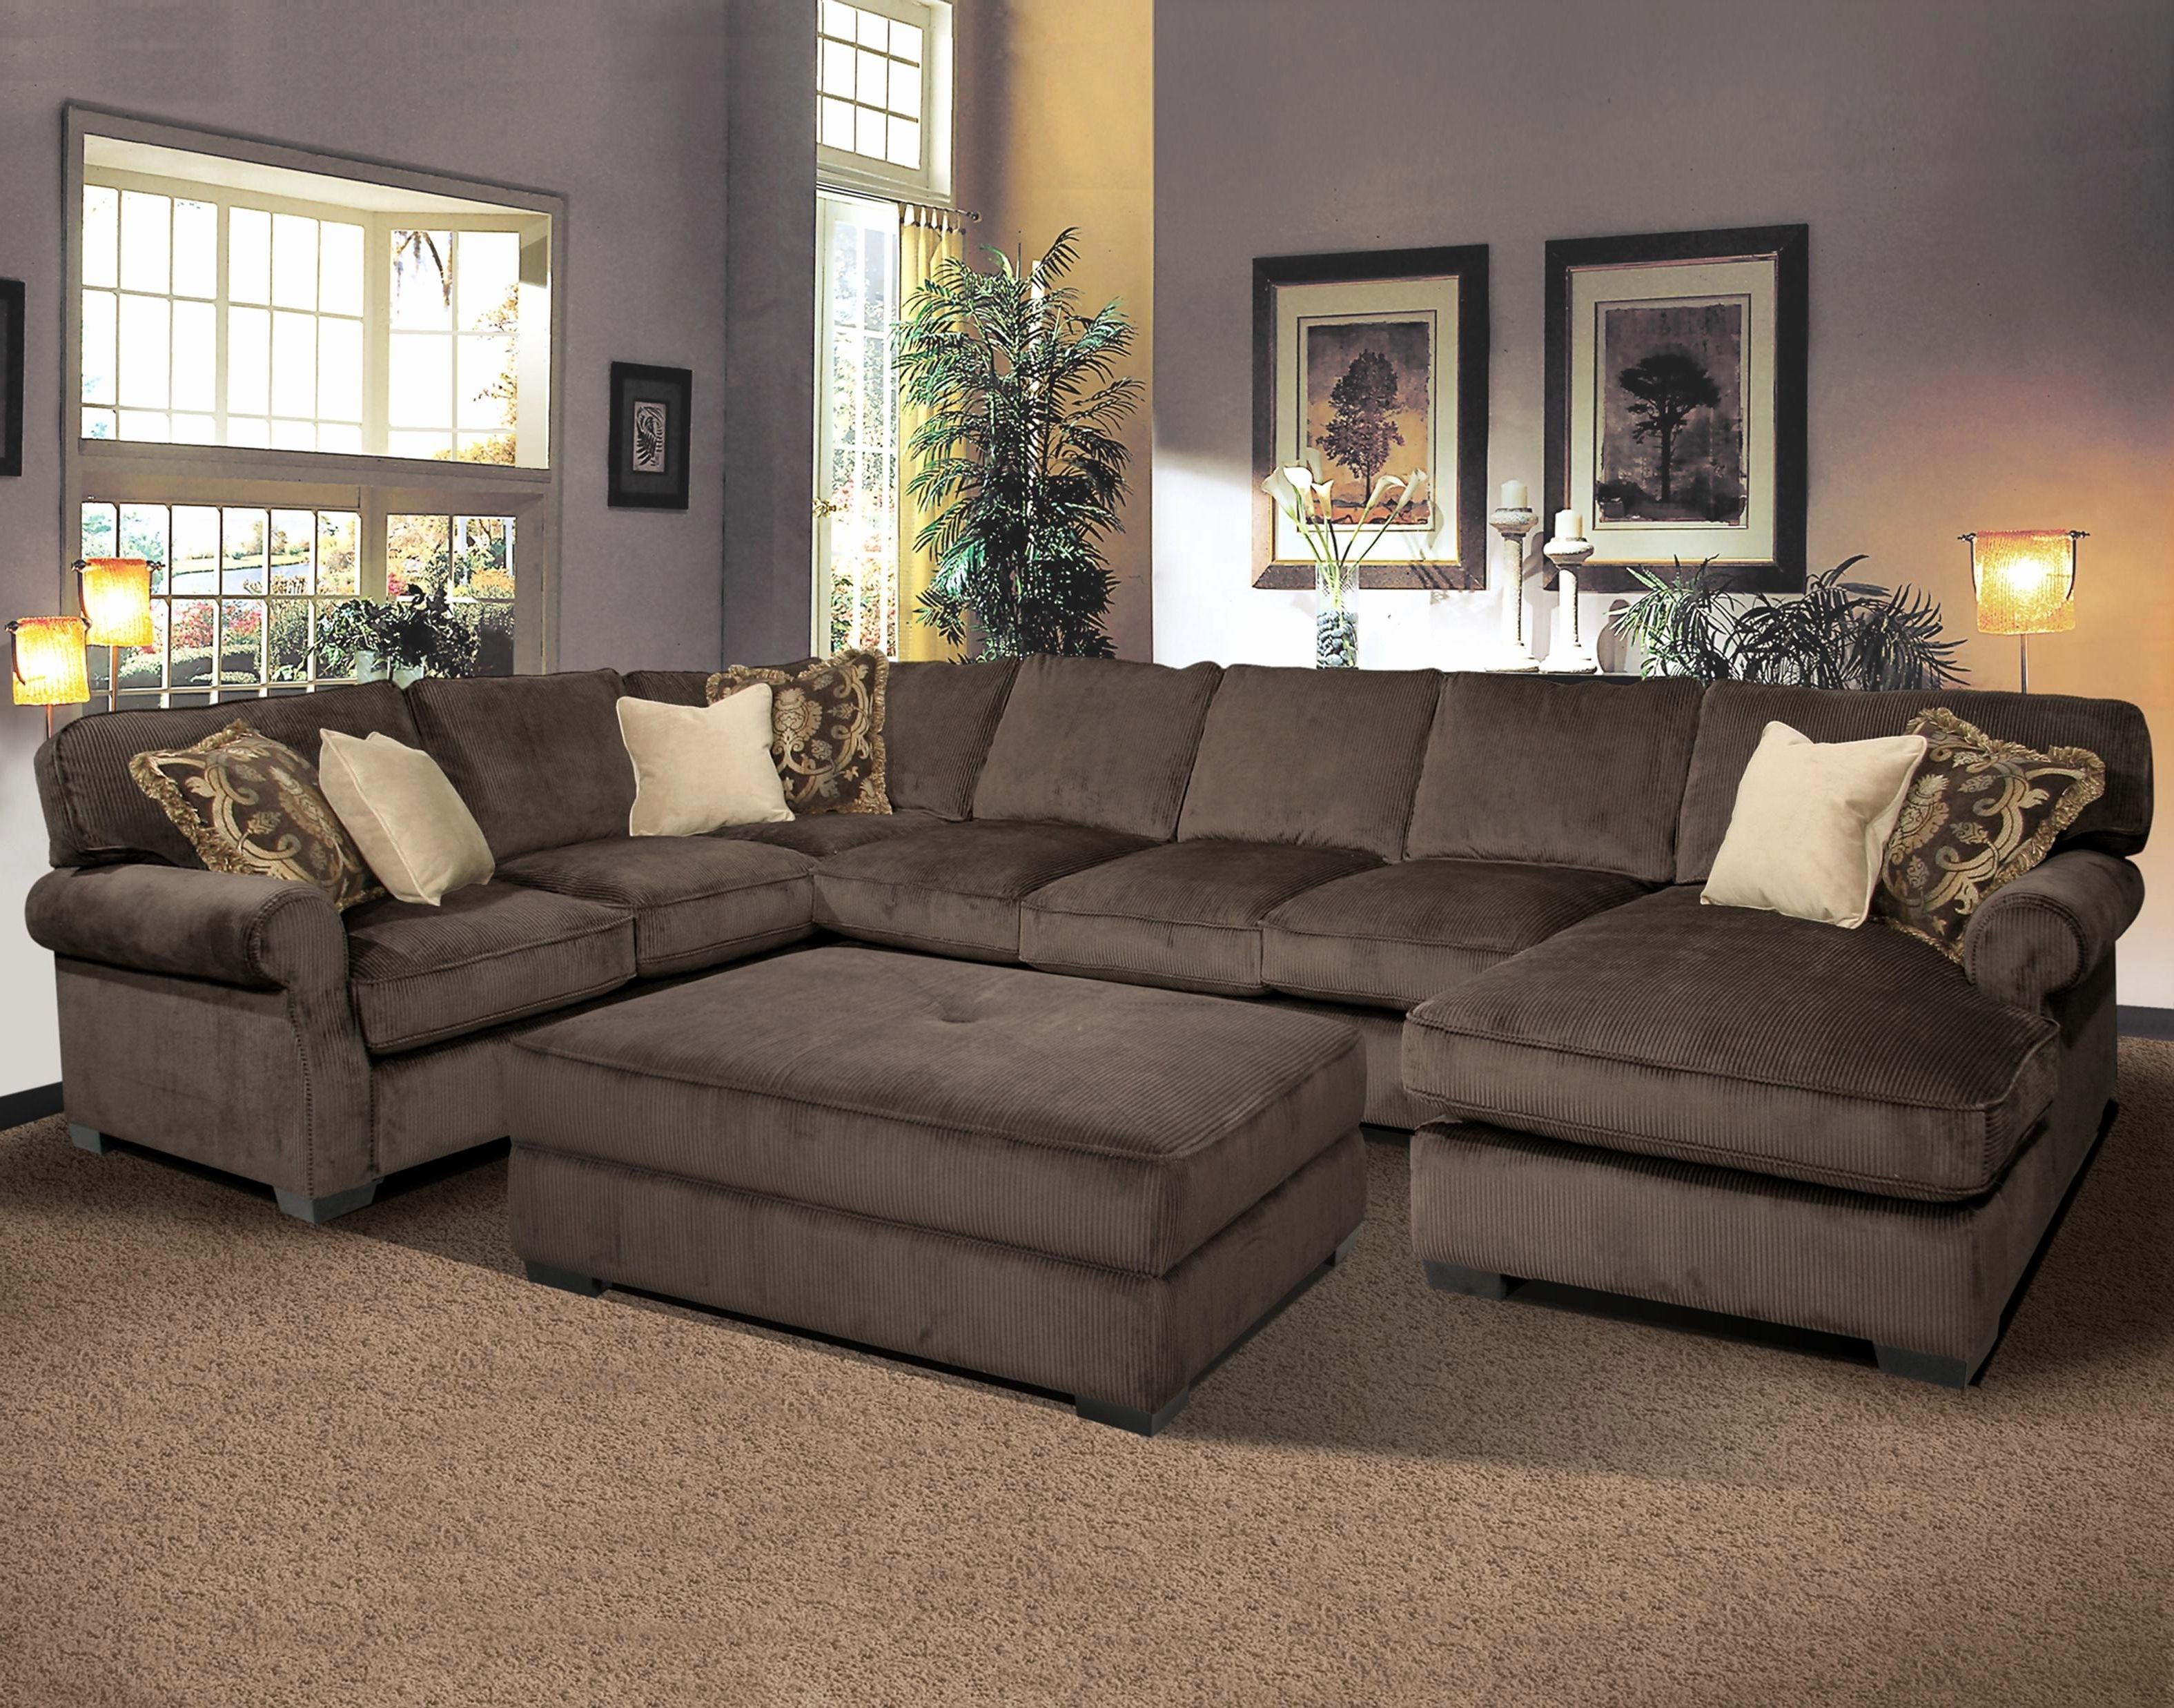 Unique Deep Sectional Couches 2018 – Couches And Sofas Ideas Inside Most Recently Released Deep Sectional Sofas With Chaise (Photo 1 of 15)